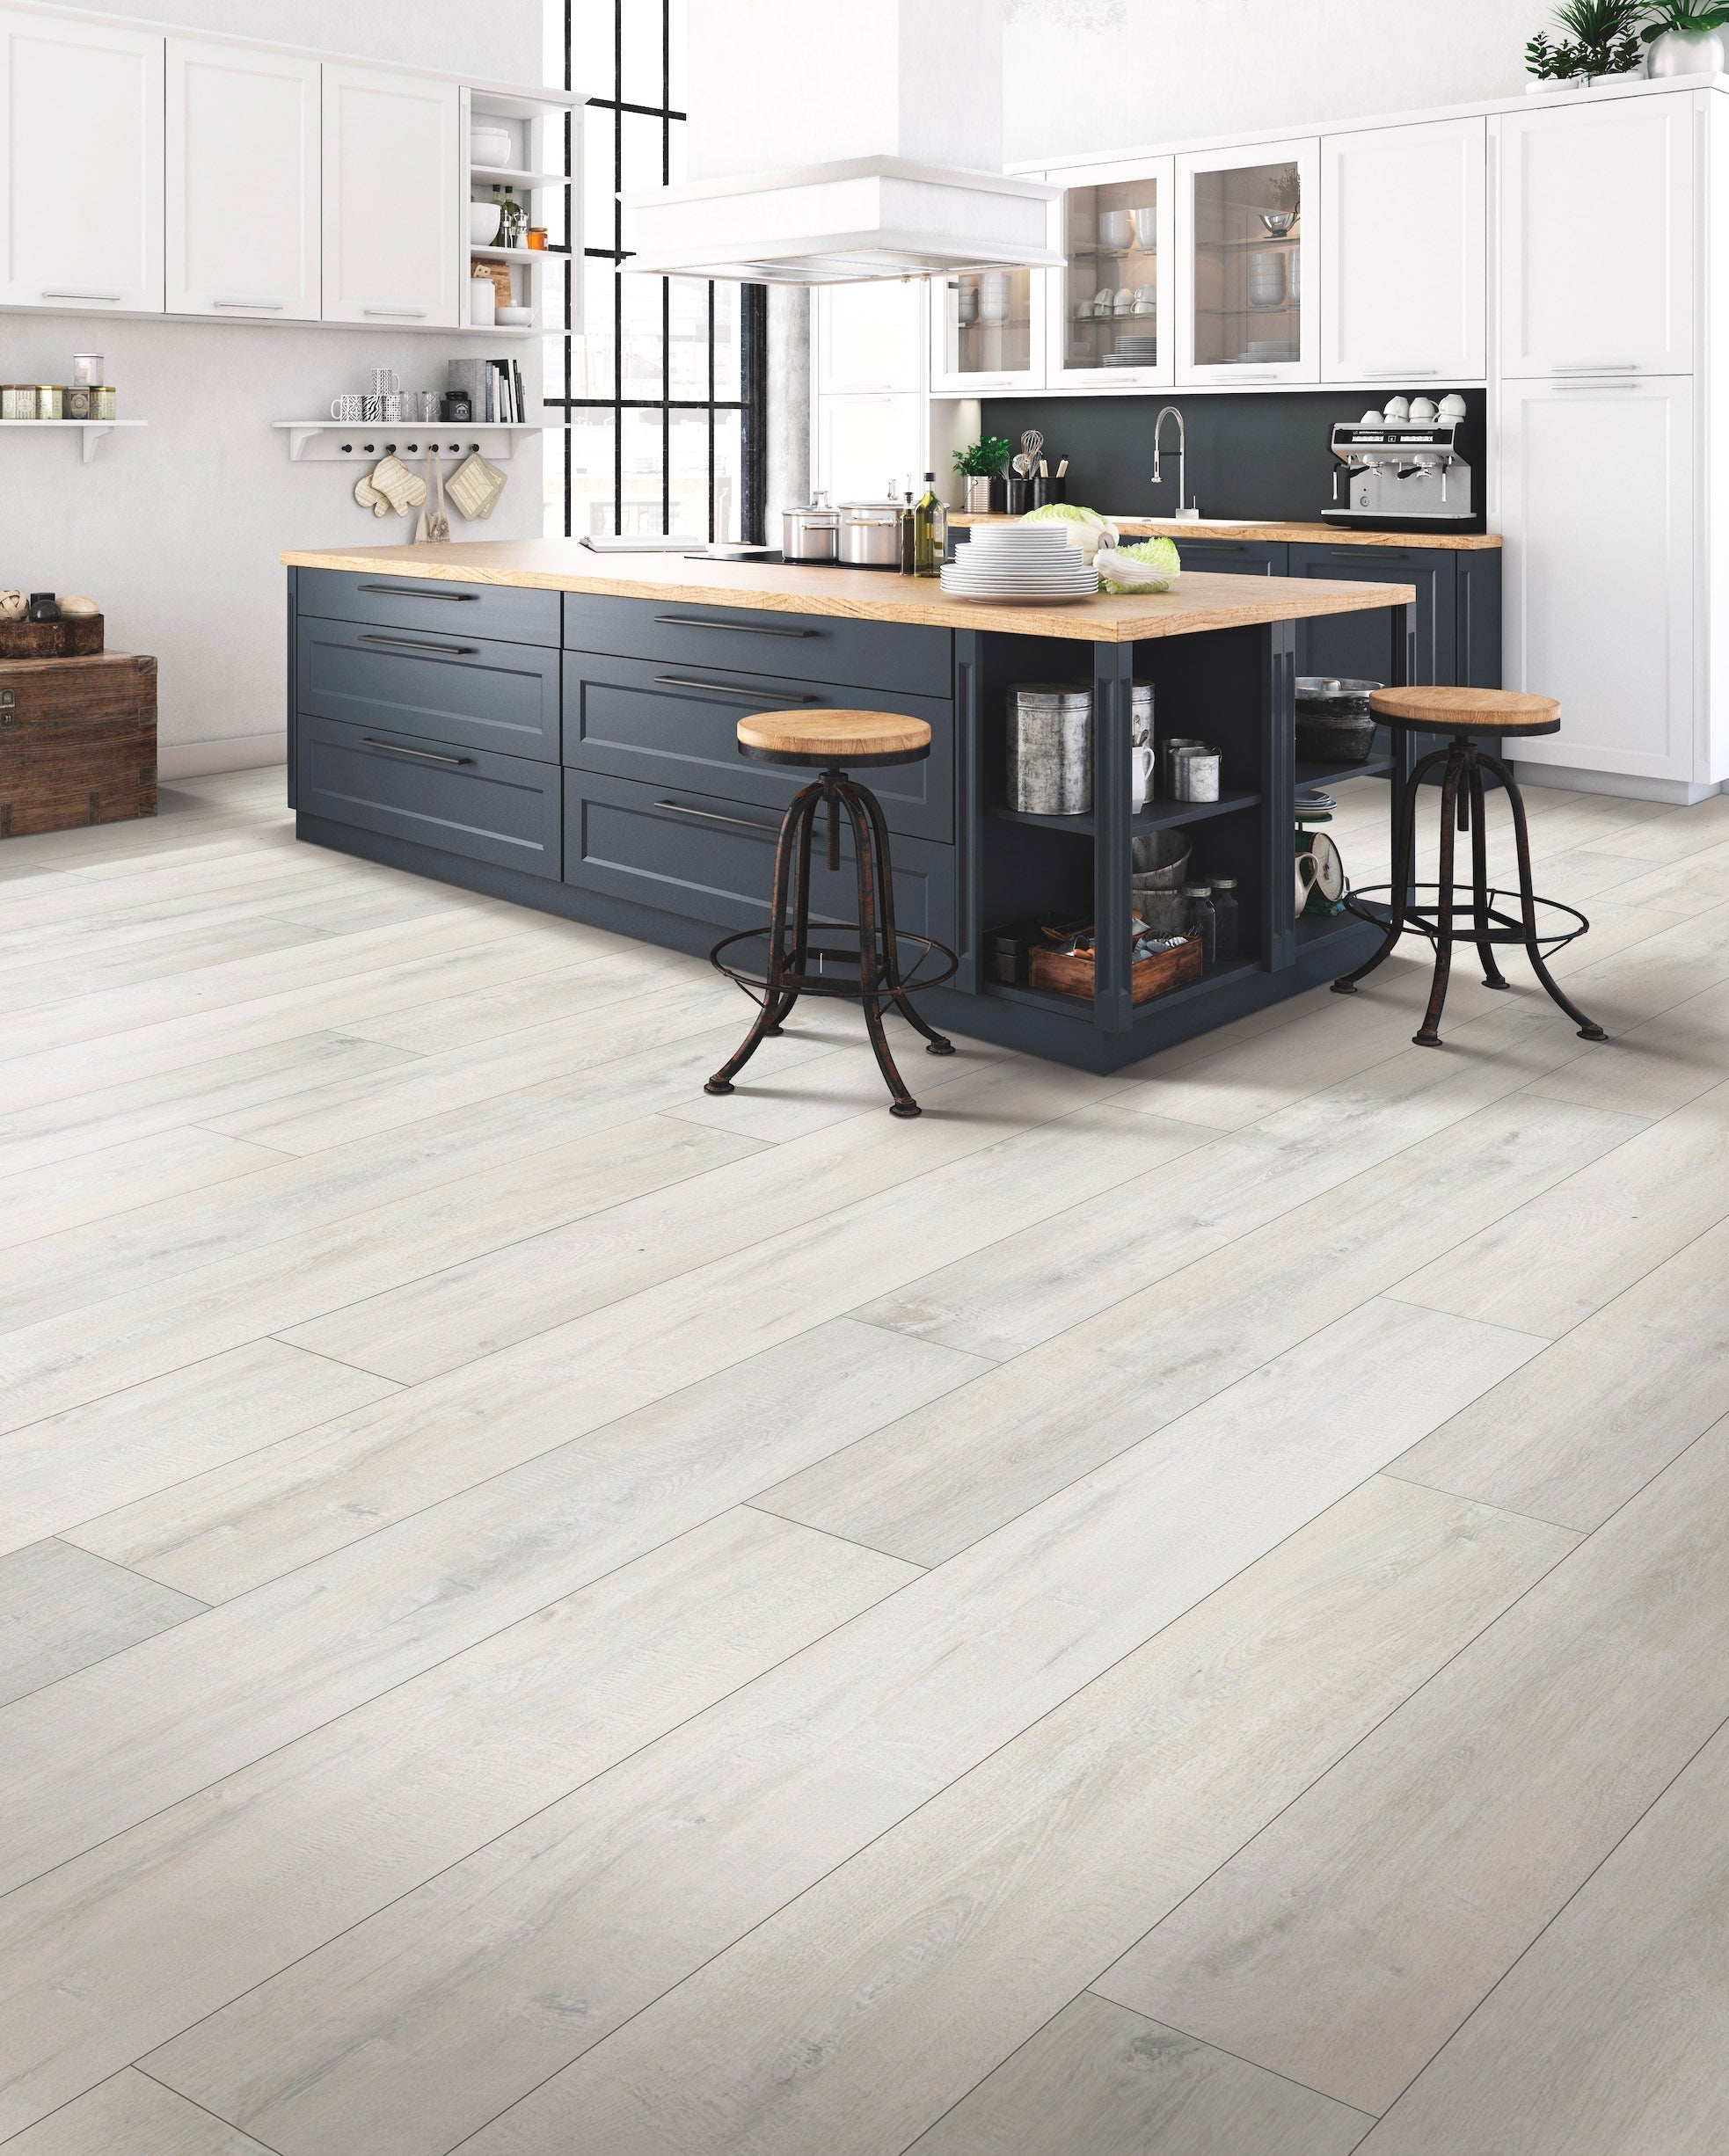 Pros and Cons of Laminate Flooring in Your Kitchen